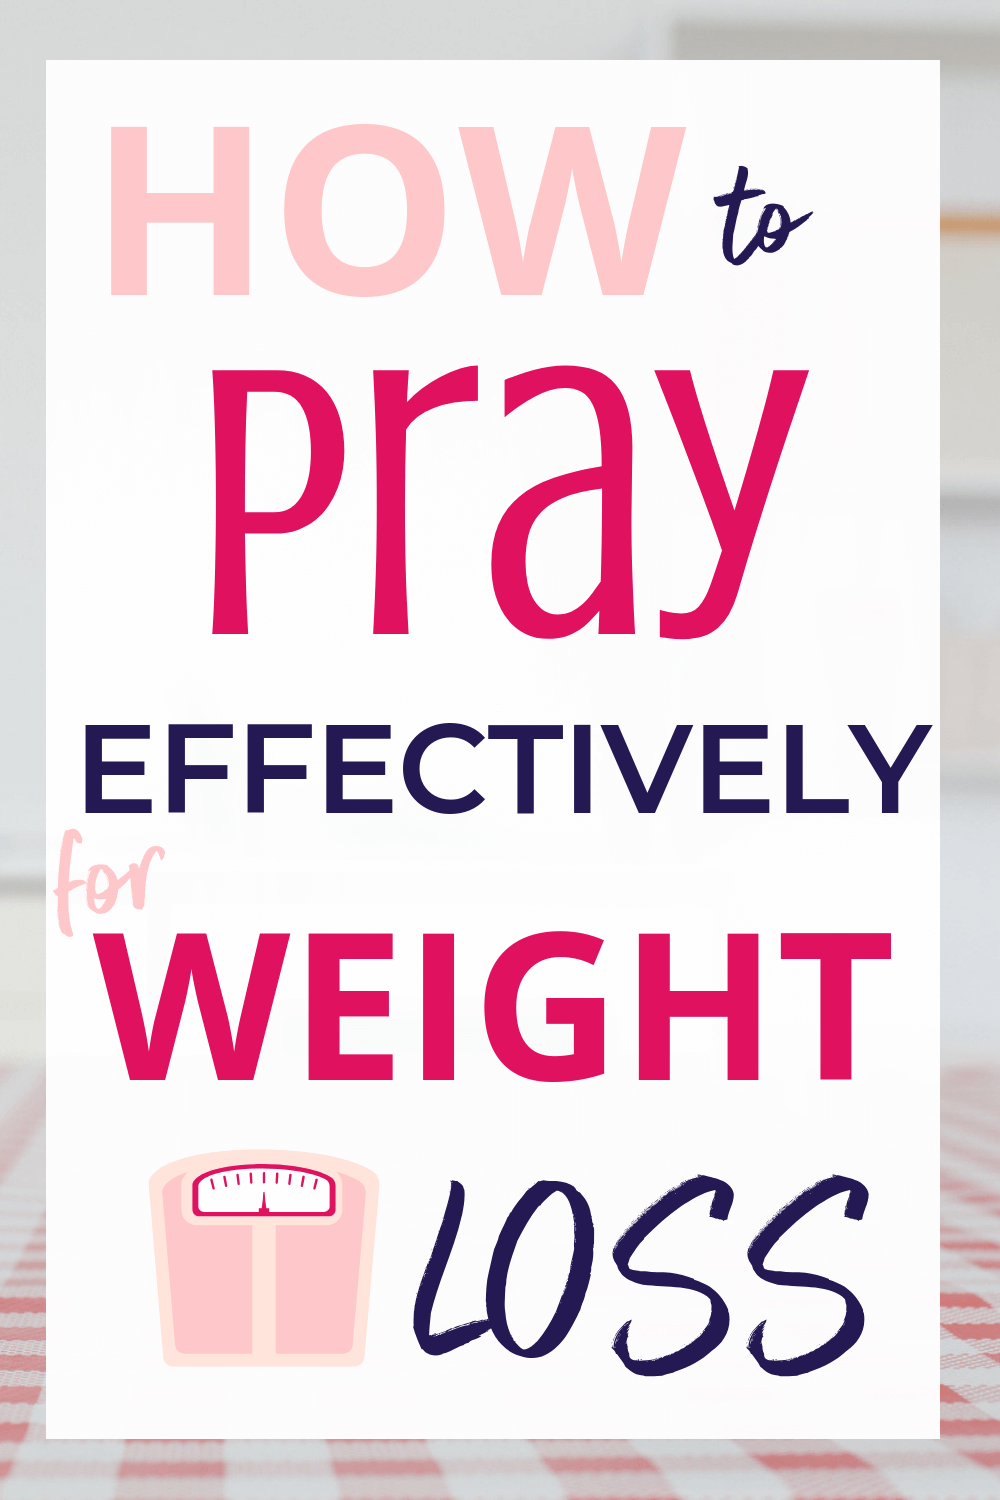 What You Need to Know About Prayer for Weight Loss